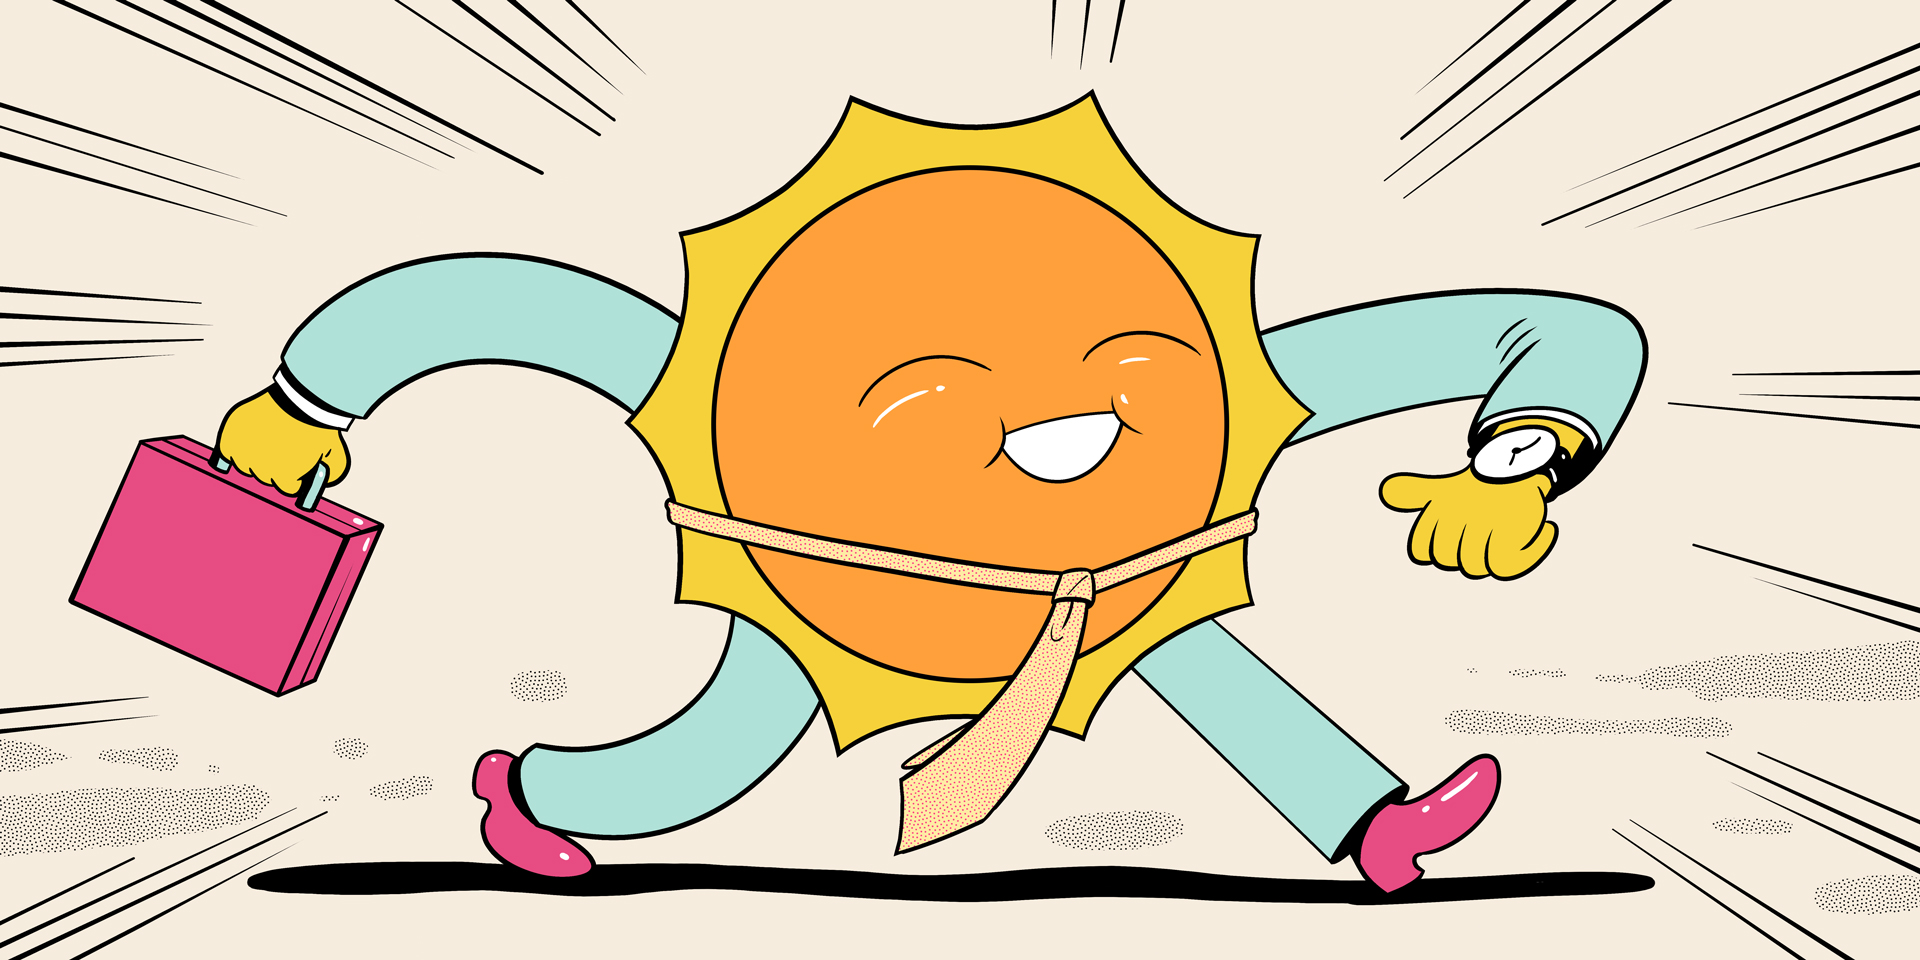 The happy sun carrying a suitcase is going forward.